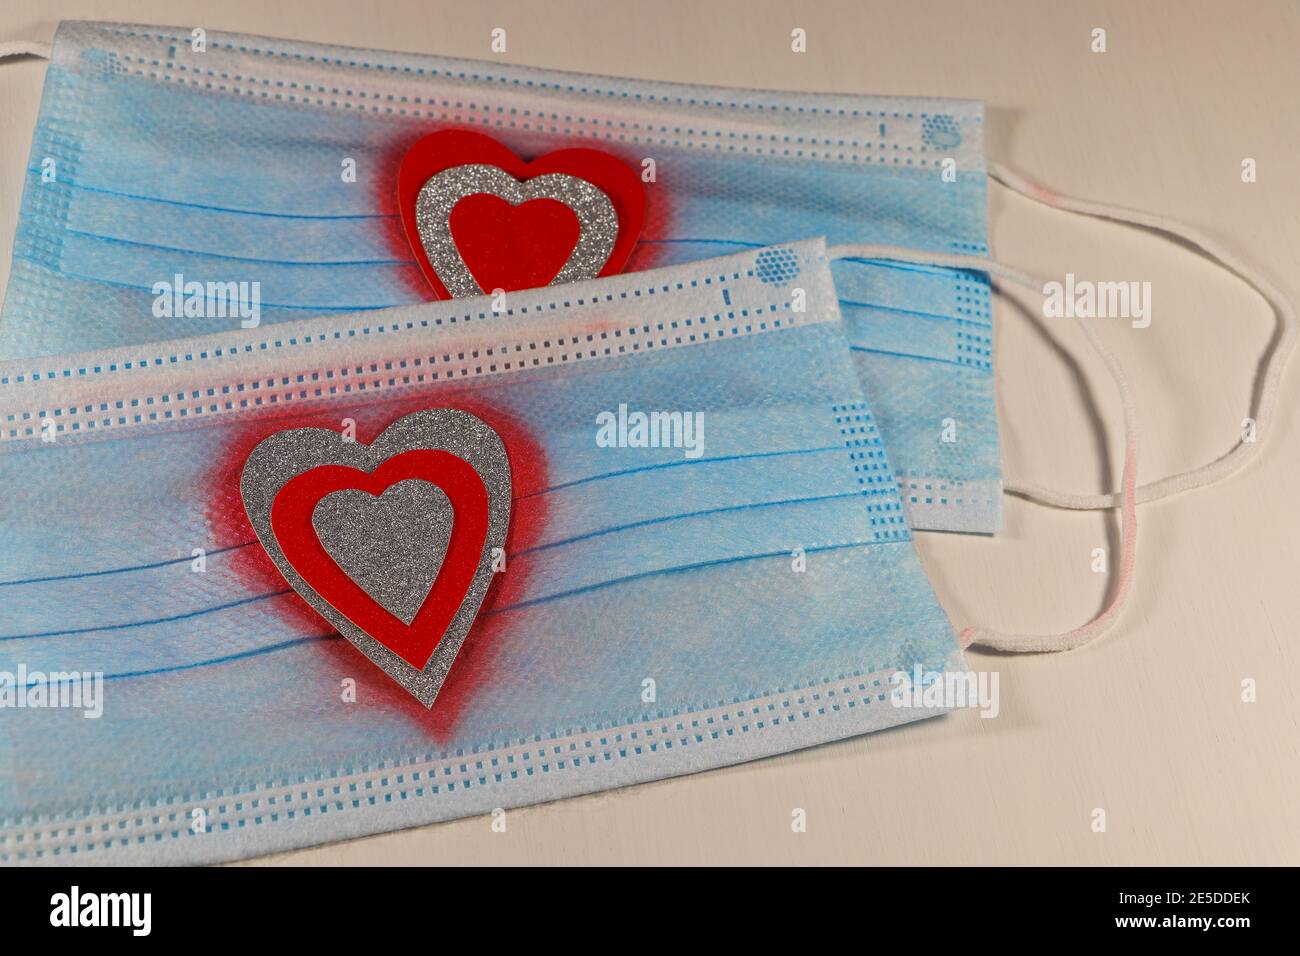 Red And Silver Hearts On Medical Facemasks Stock Photo